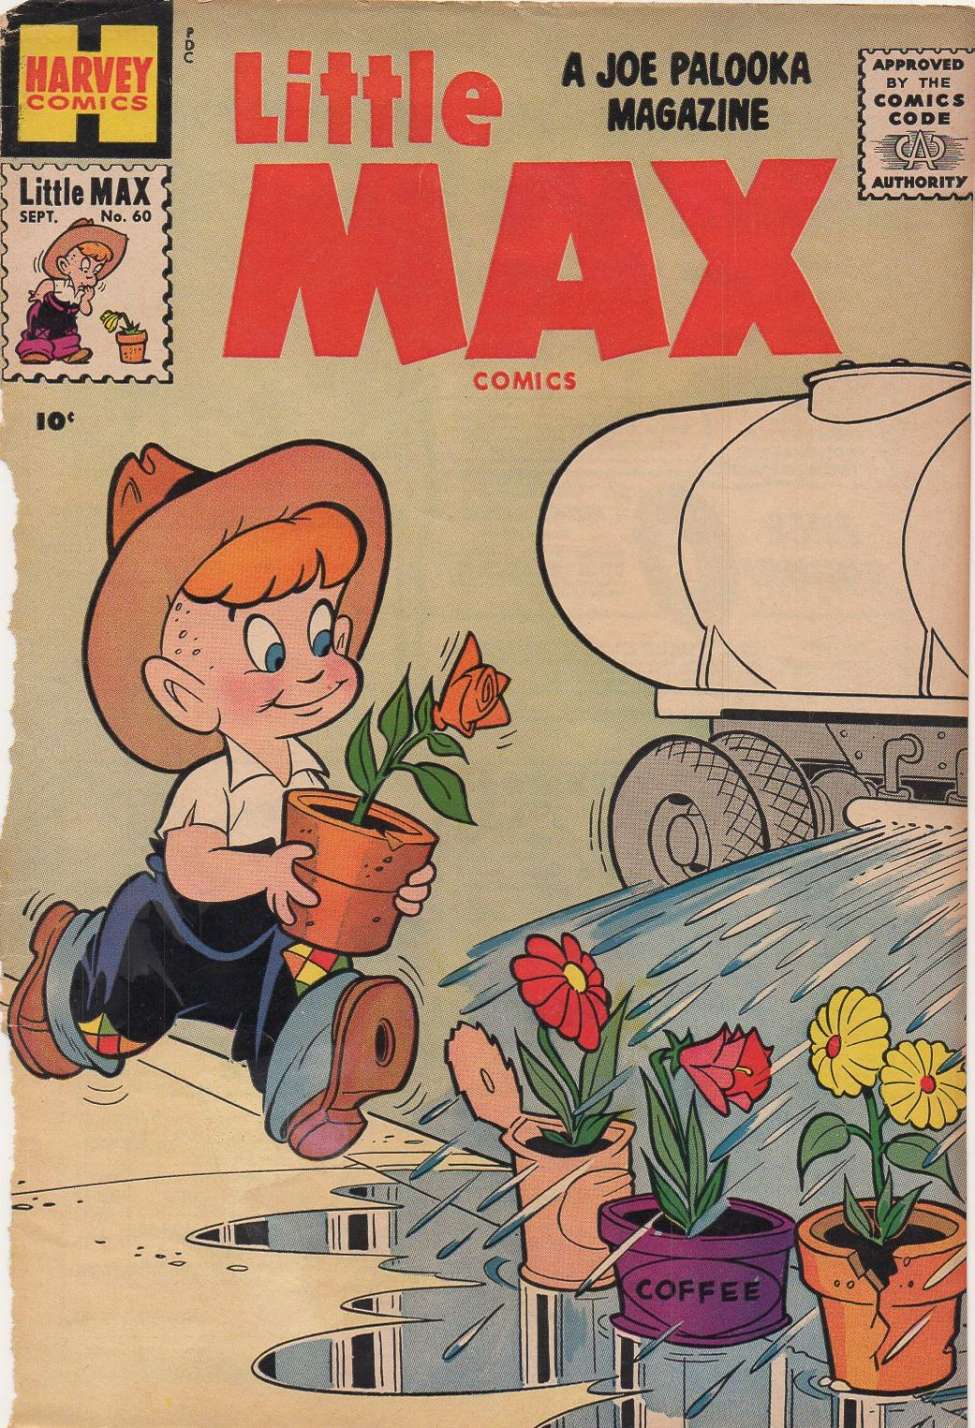 Book Cover For Little Max Comics 60